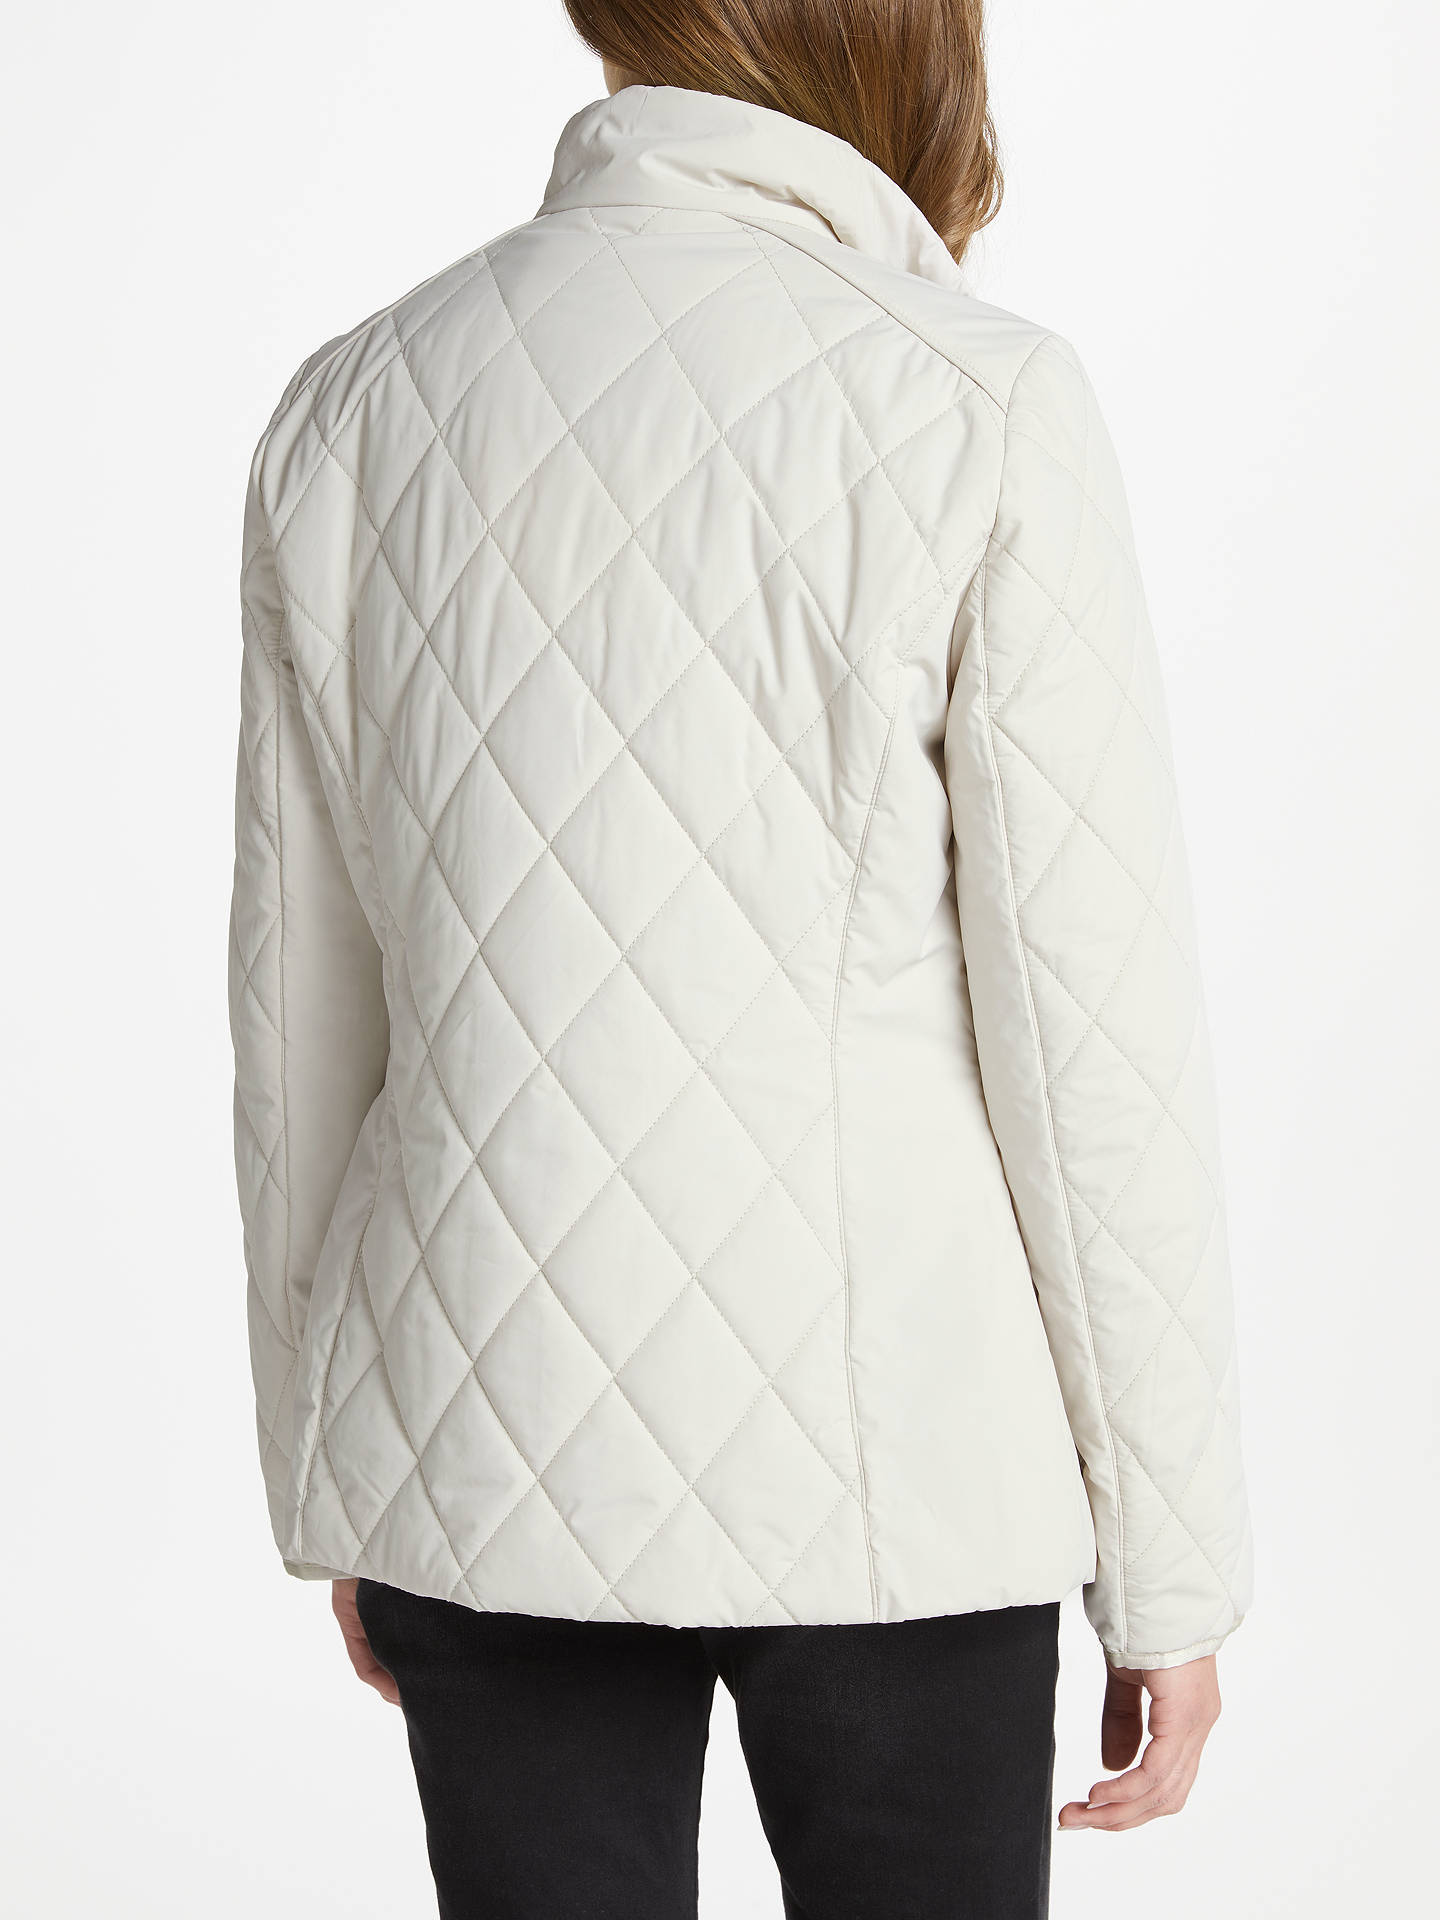 Gerry Weber Quilted Jacket, Beige at John Lewis & Partners